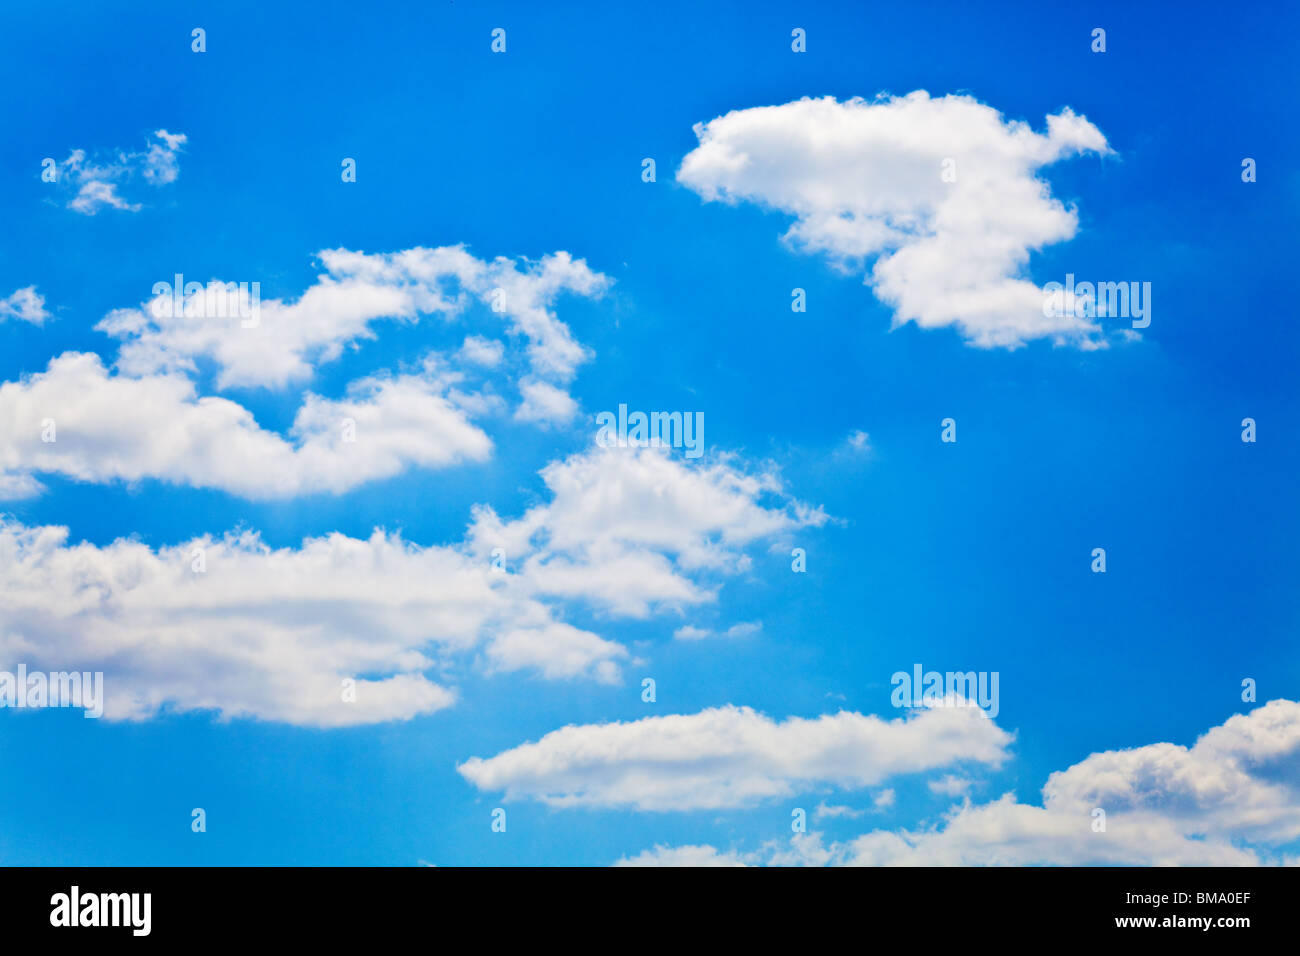 blue sky with white fluffy clouds background Stock Photo